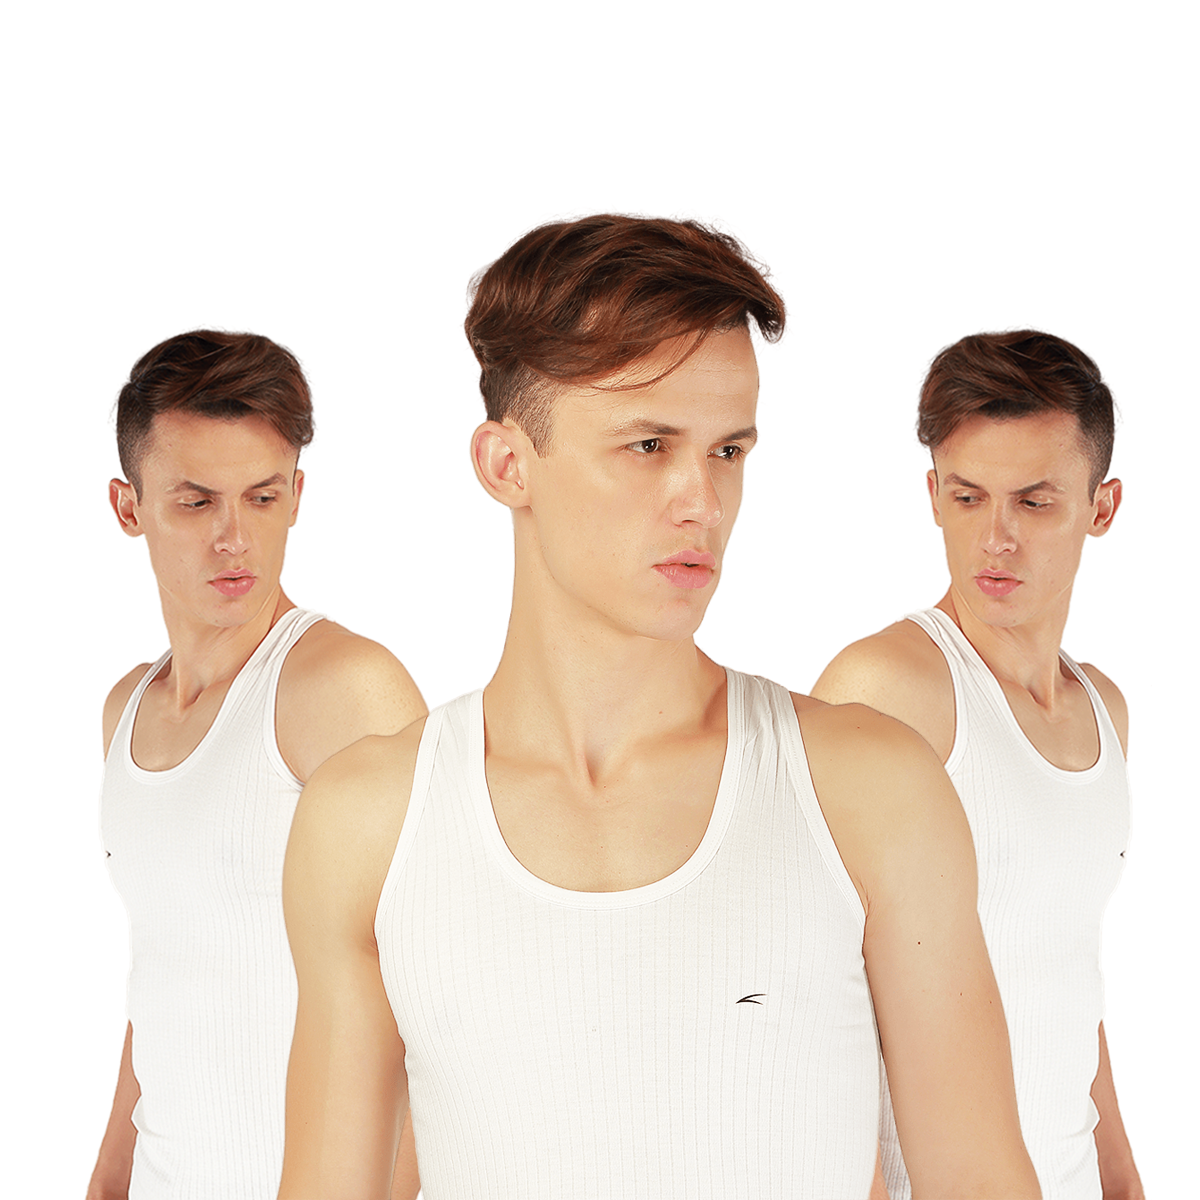 Classic Oxy Sleeveless White Vests for Men - Pack of 3